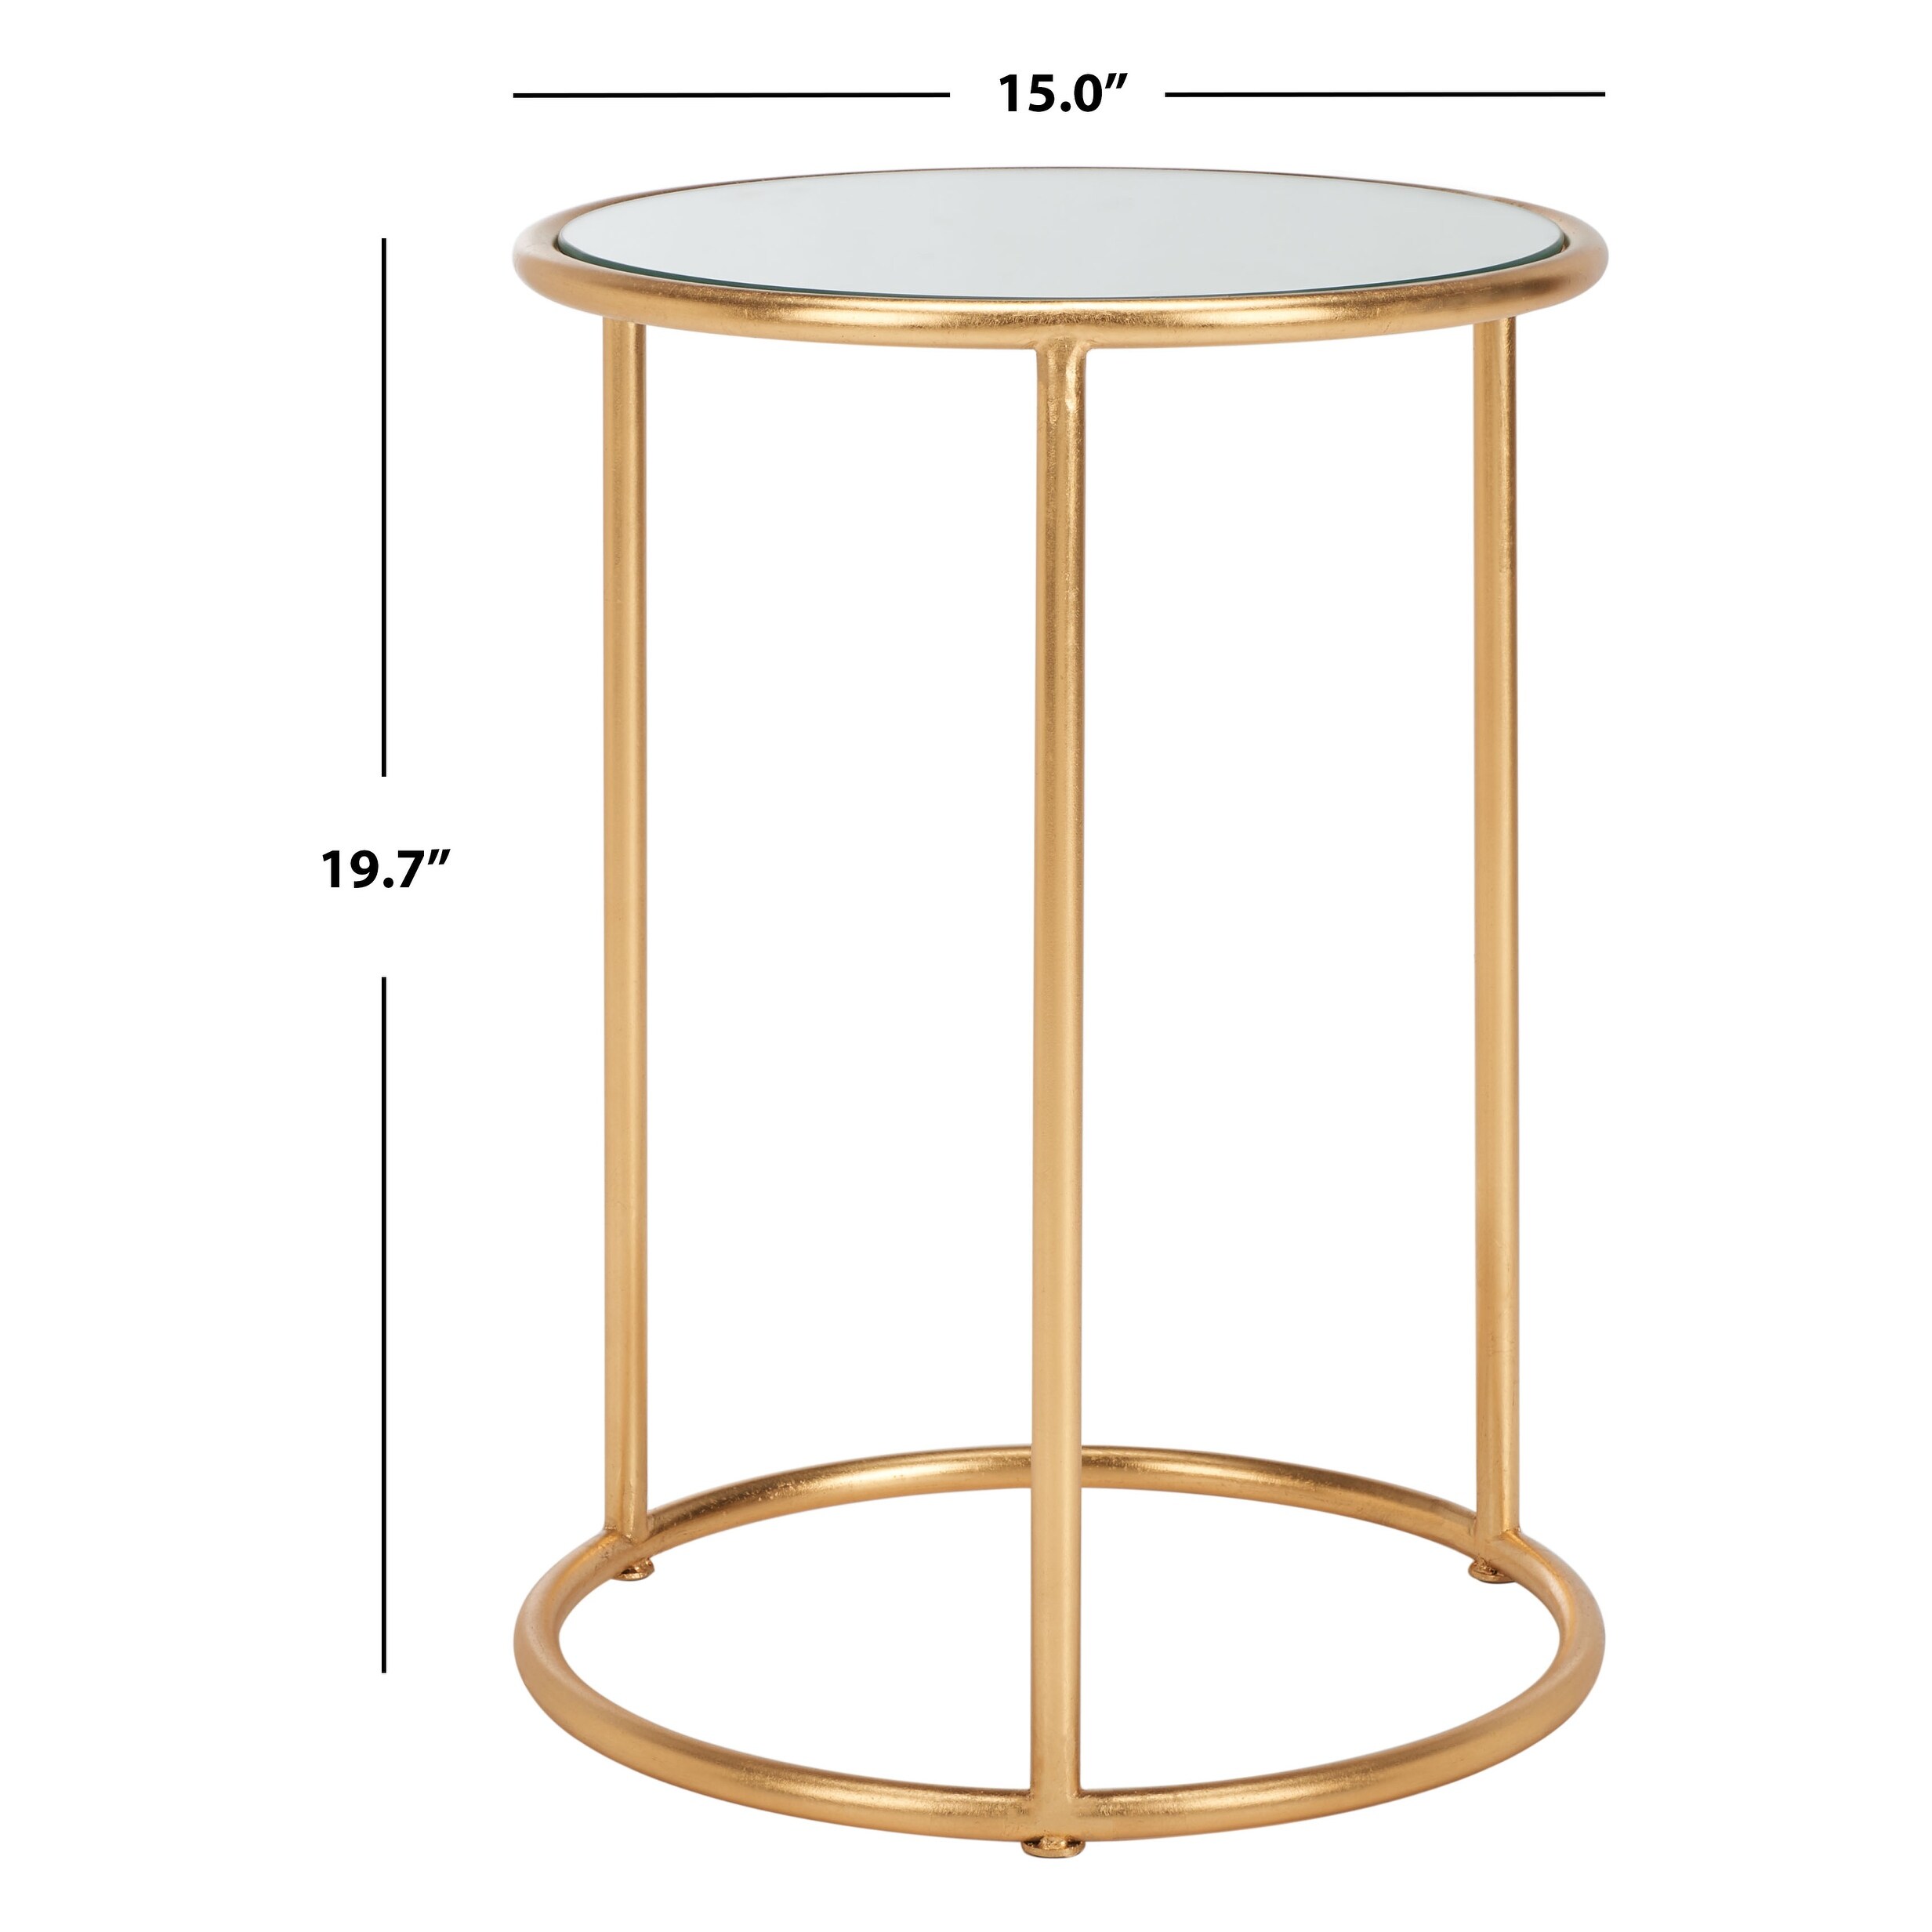 SAFAVIEH Treasures Shay Gold/ Mirror Top Accent Table - 15" x 15" x 19.7"